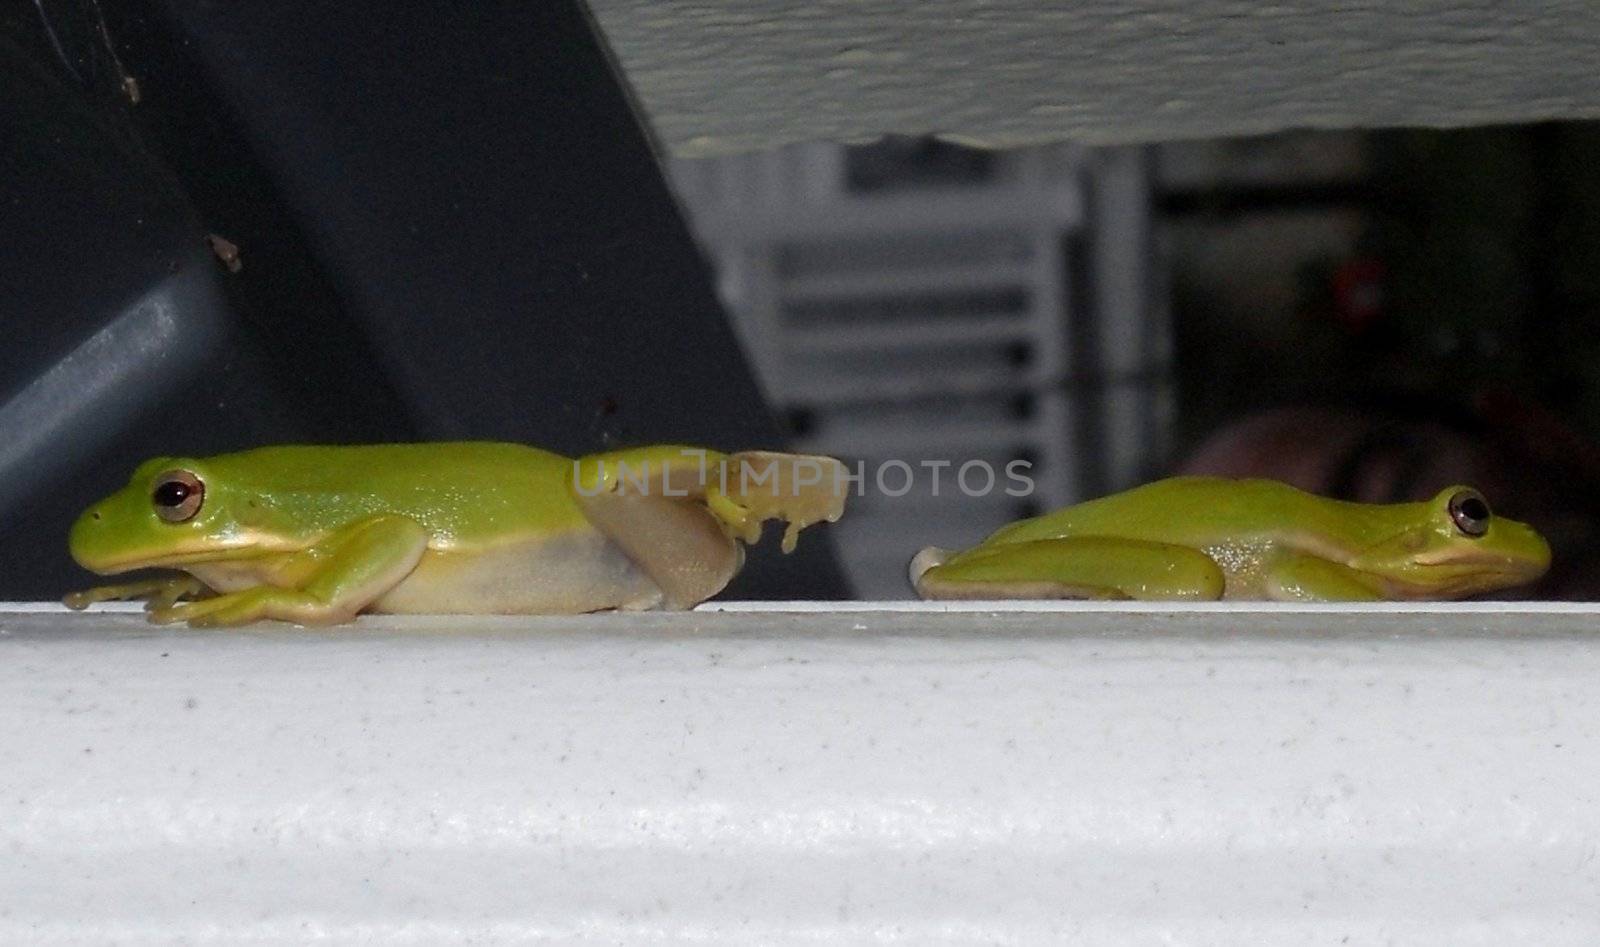 American tree frogs often come out and mate just after warm summer rains. Here, two have met up on a downspout.